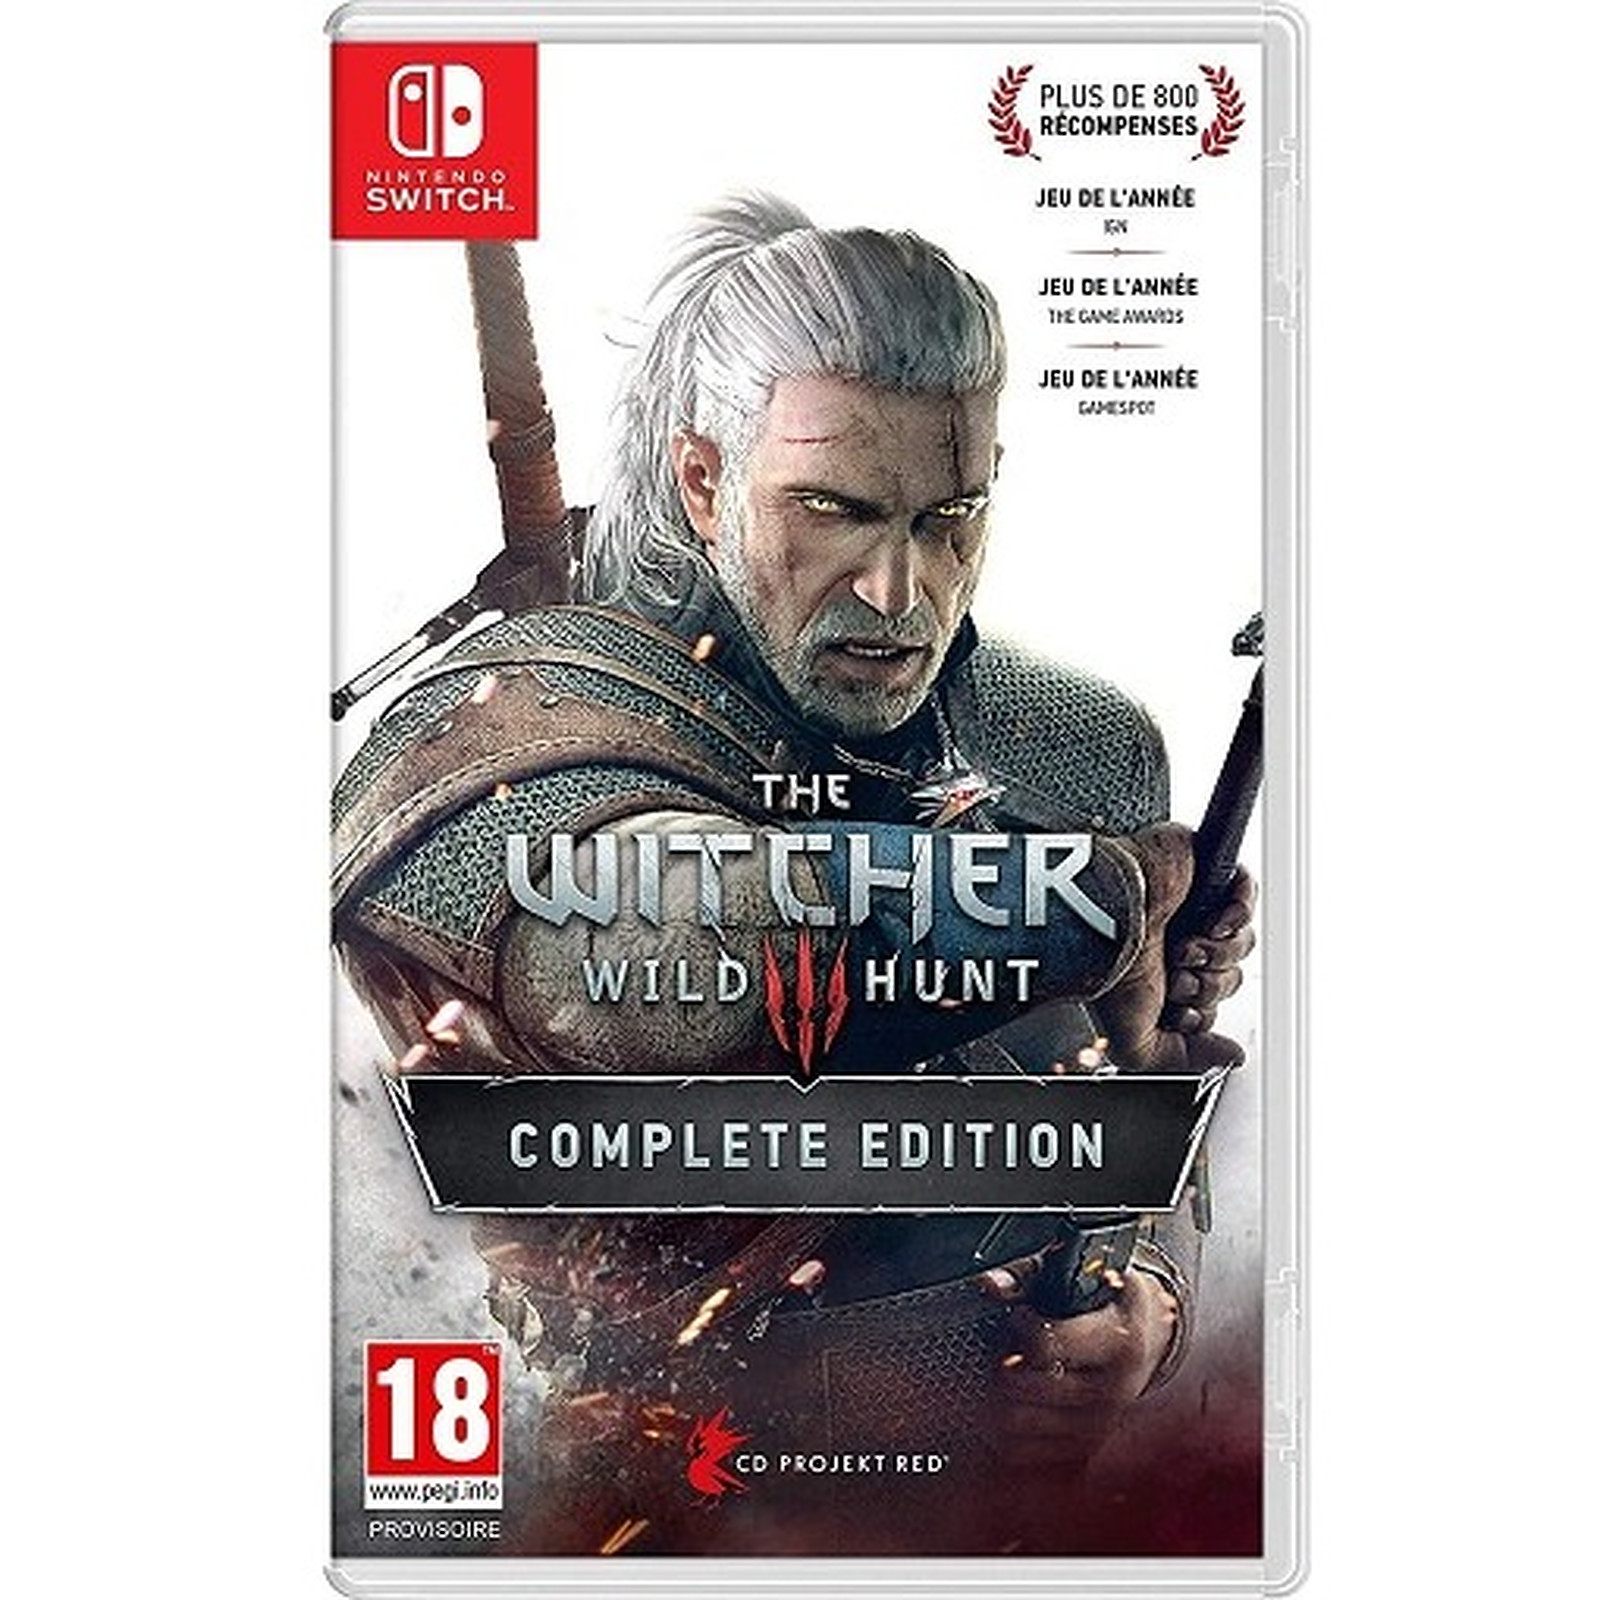 The Witcher 3 Wild Hunt Complete Edition (SWITCH) - Jeux Nintendo Switch Bandai Namco Games